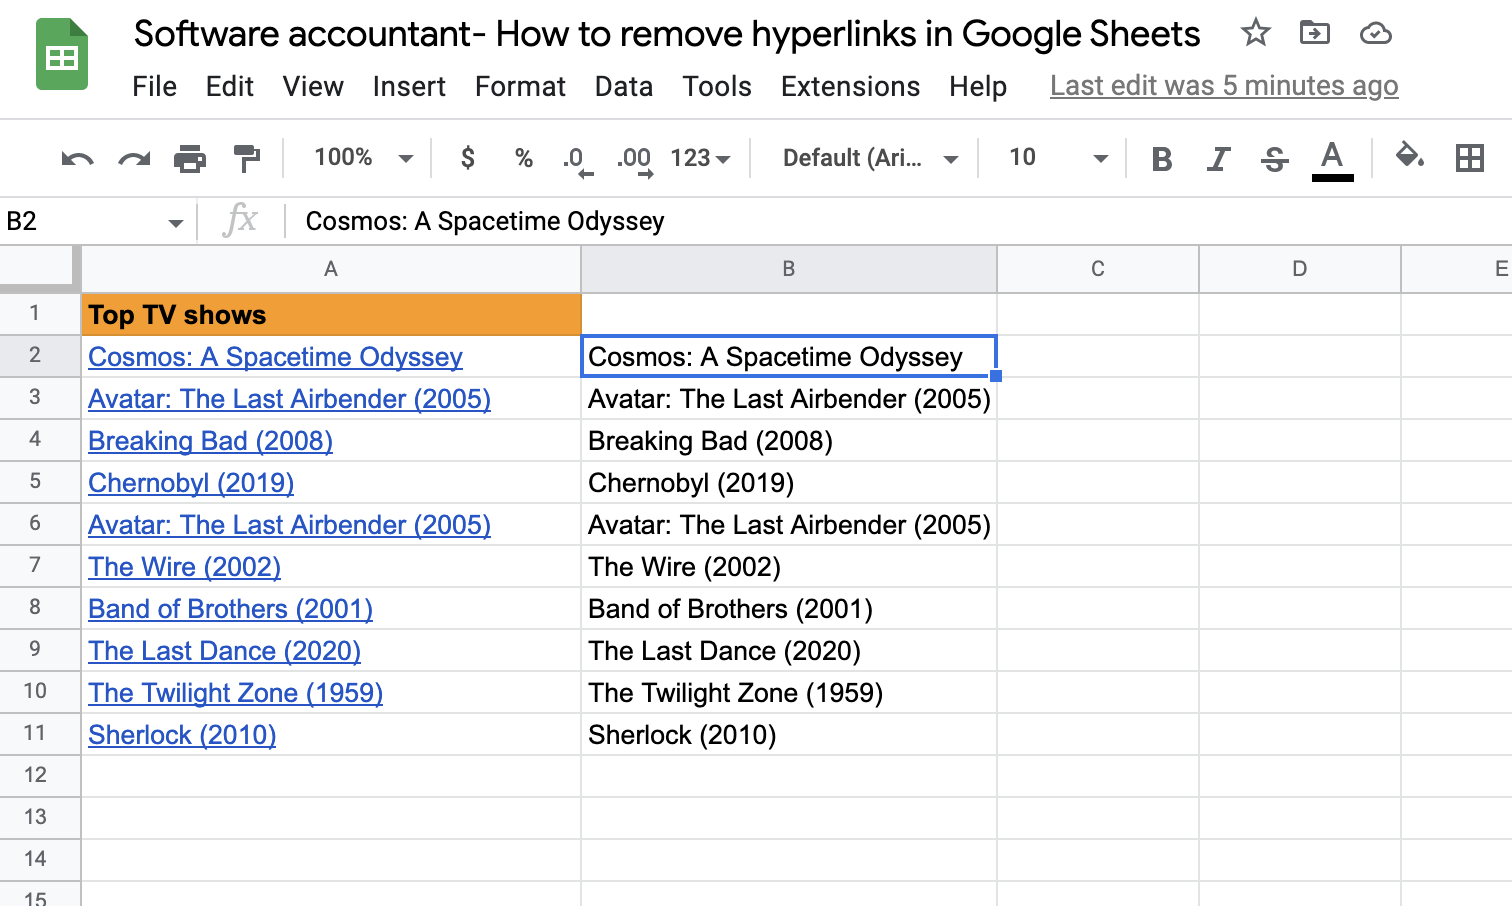 How to remove hyperlinks in Google Sheets using paste special